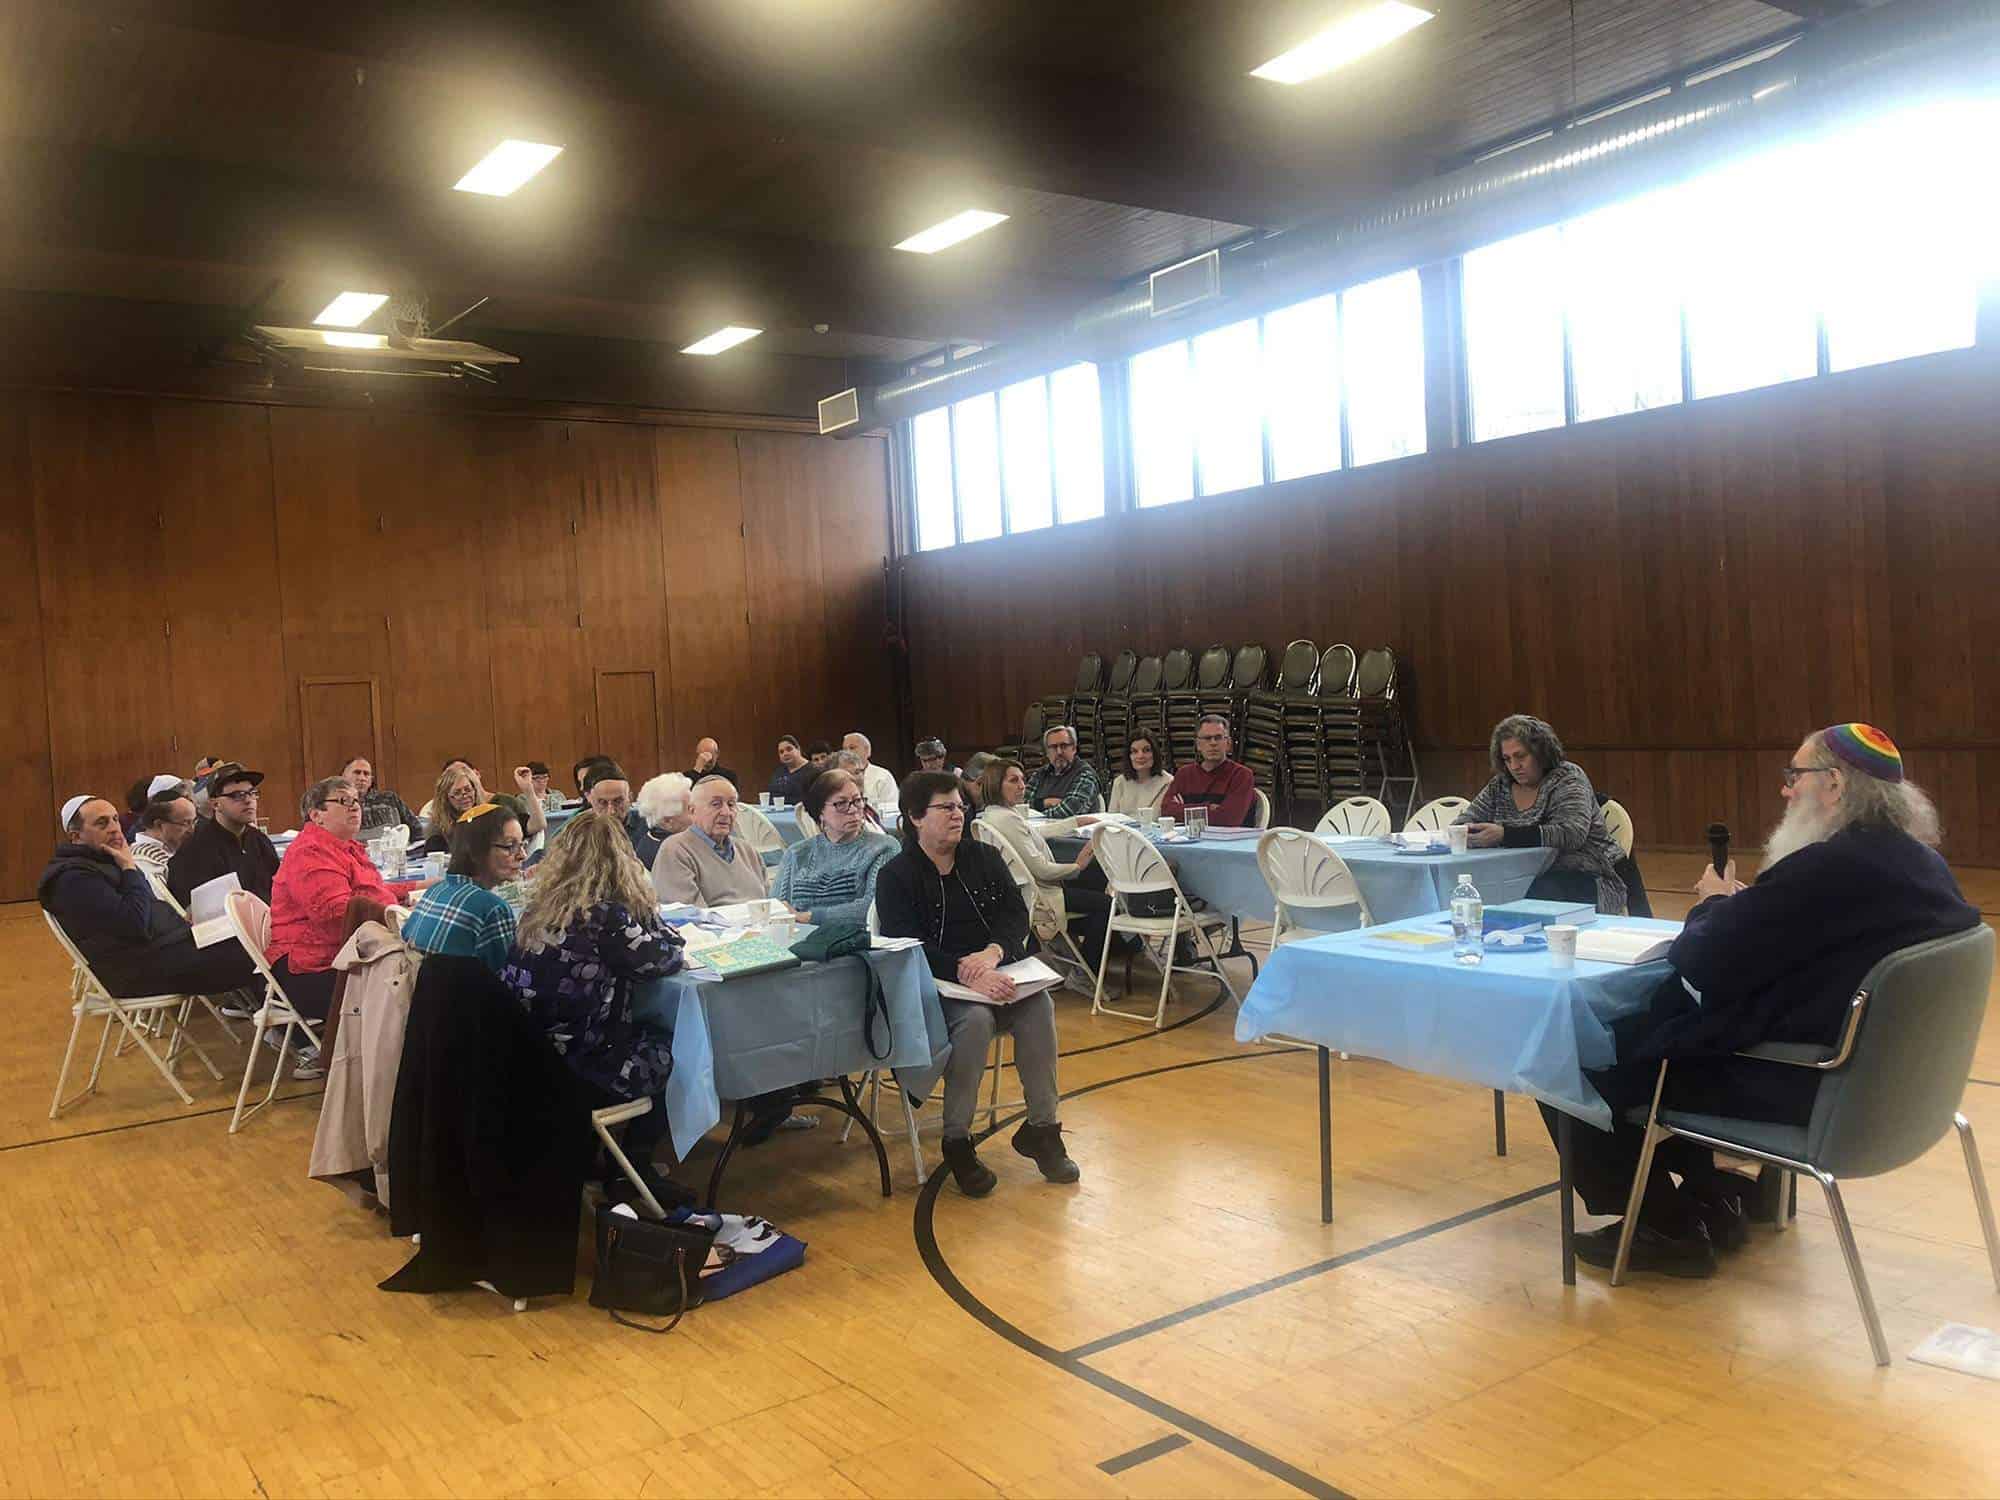 Joe Rosenstein teaching as a Scholar-in-Residence at the First Hebrew Congregation of Peekskill NY in November 2019